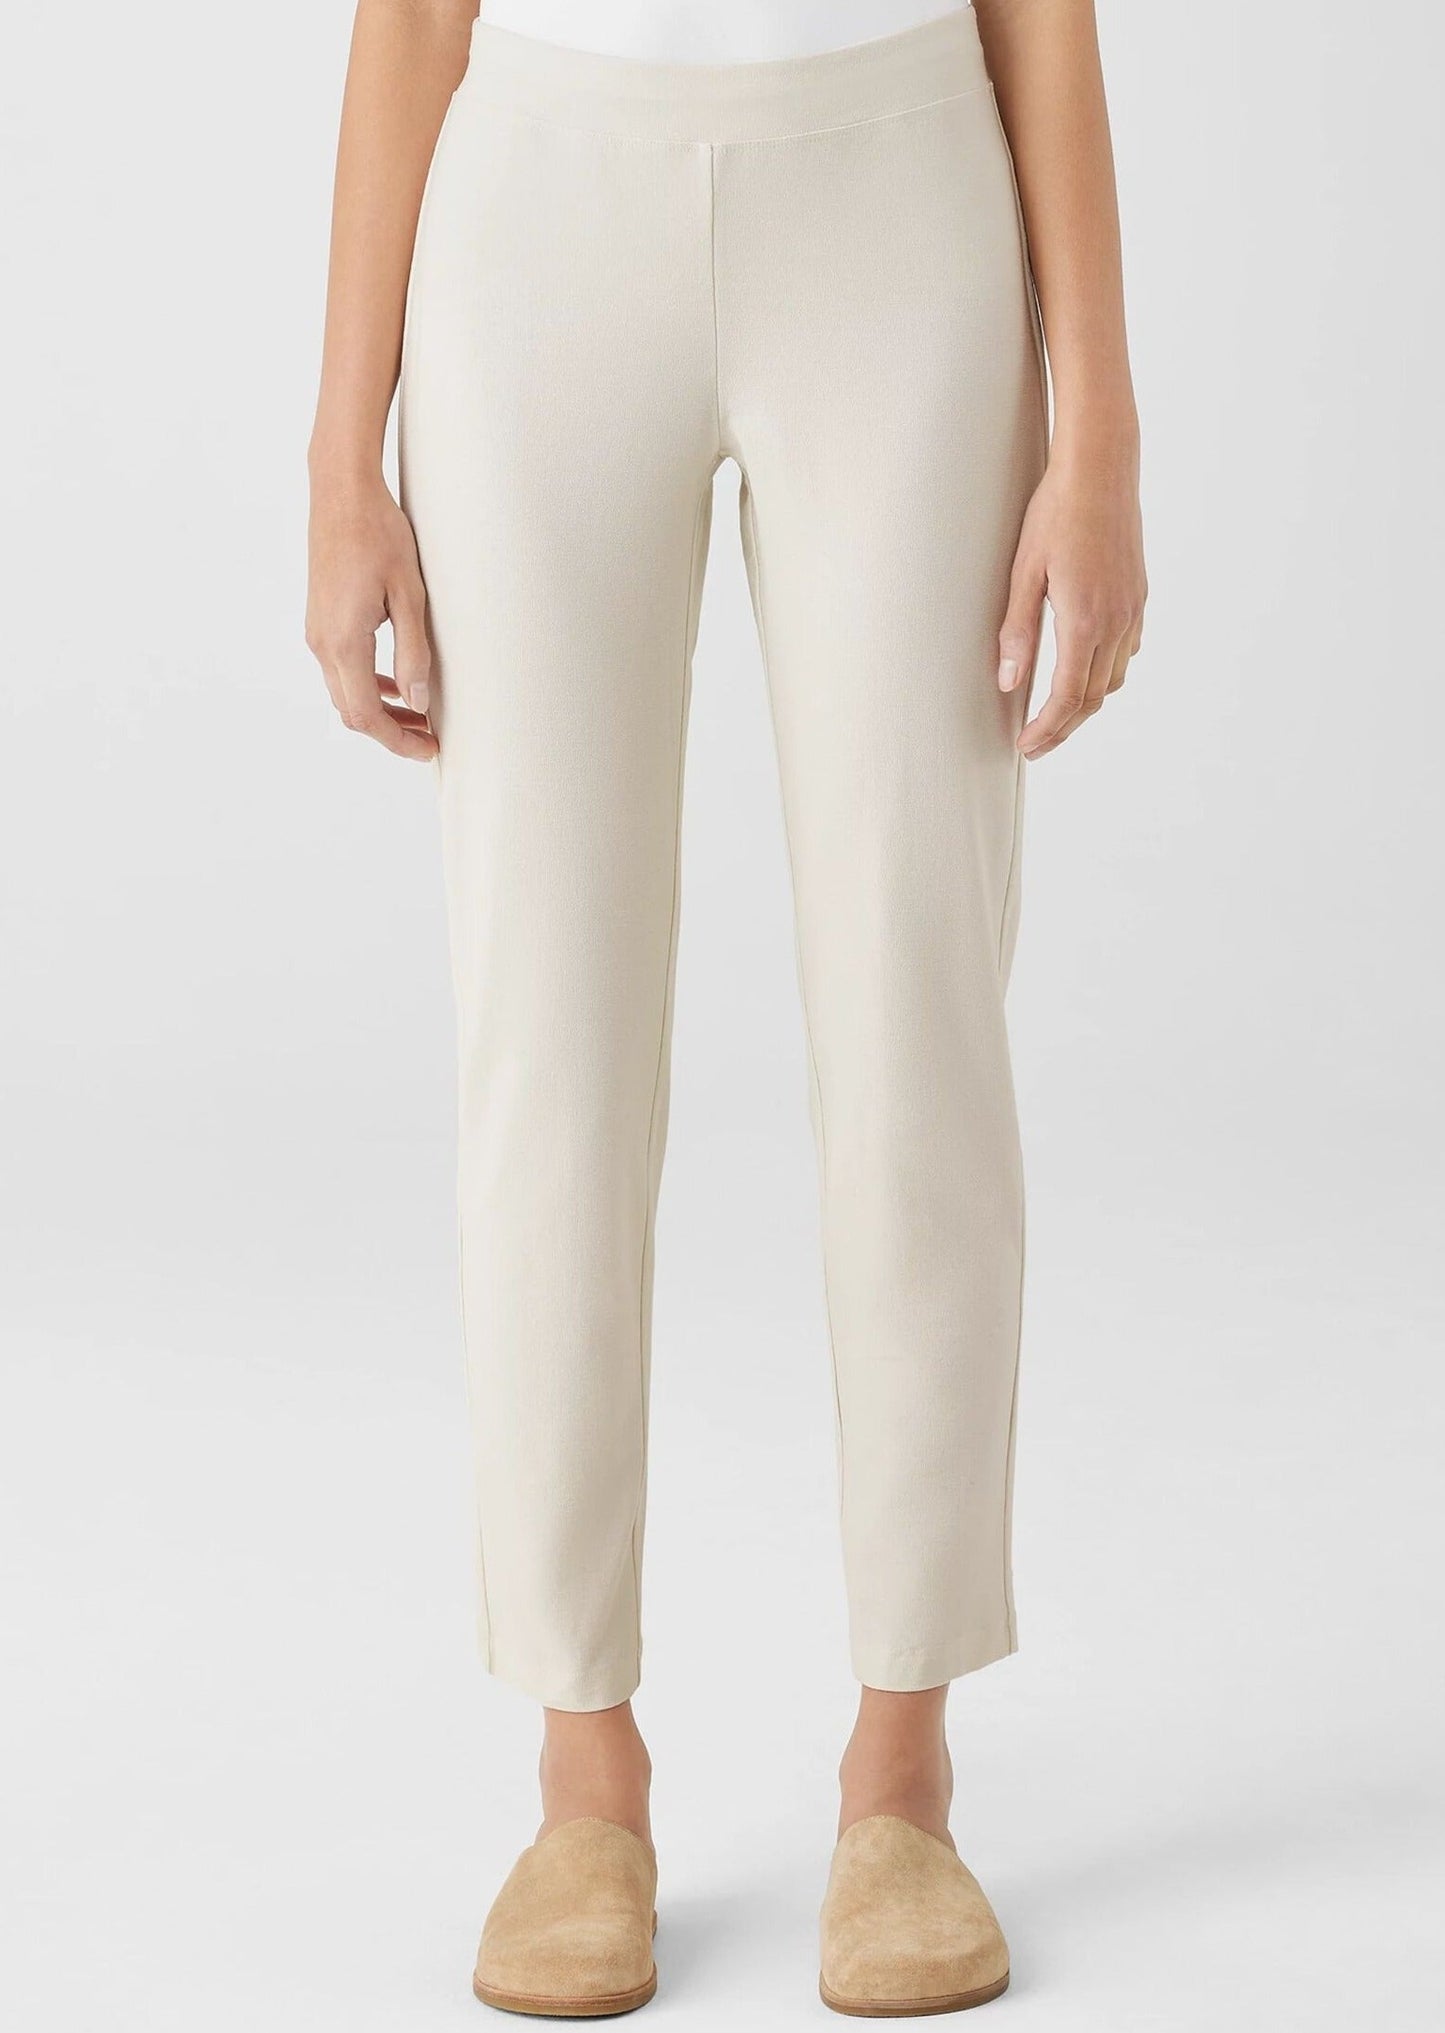 Eileen Fisher - Washable Stretch Crepe Pant